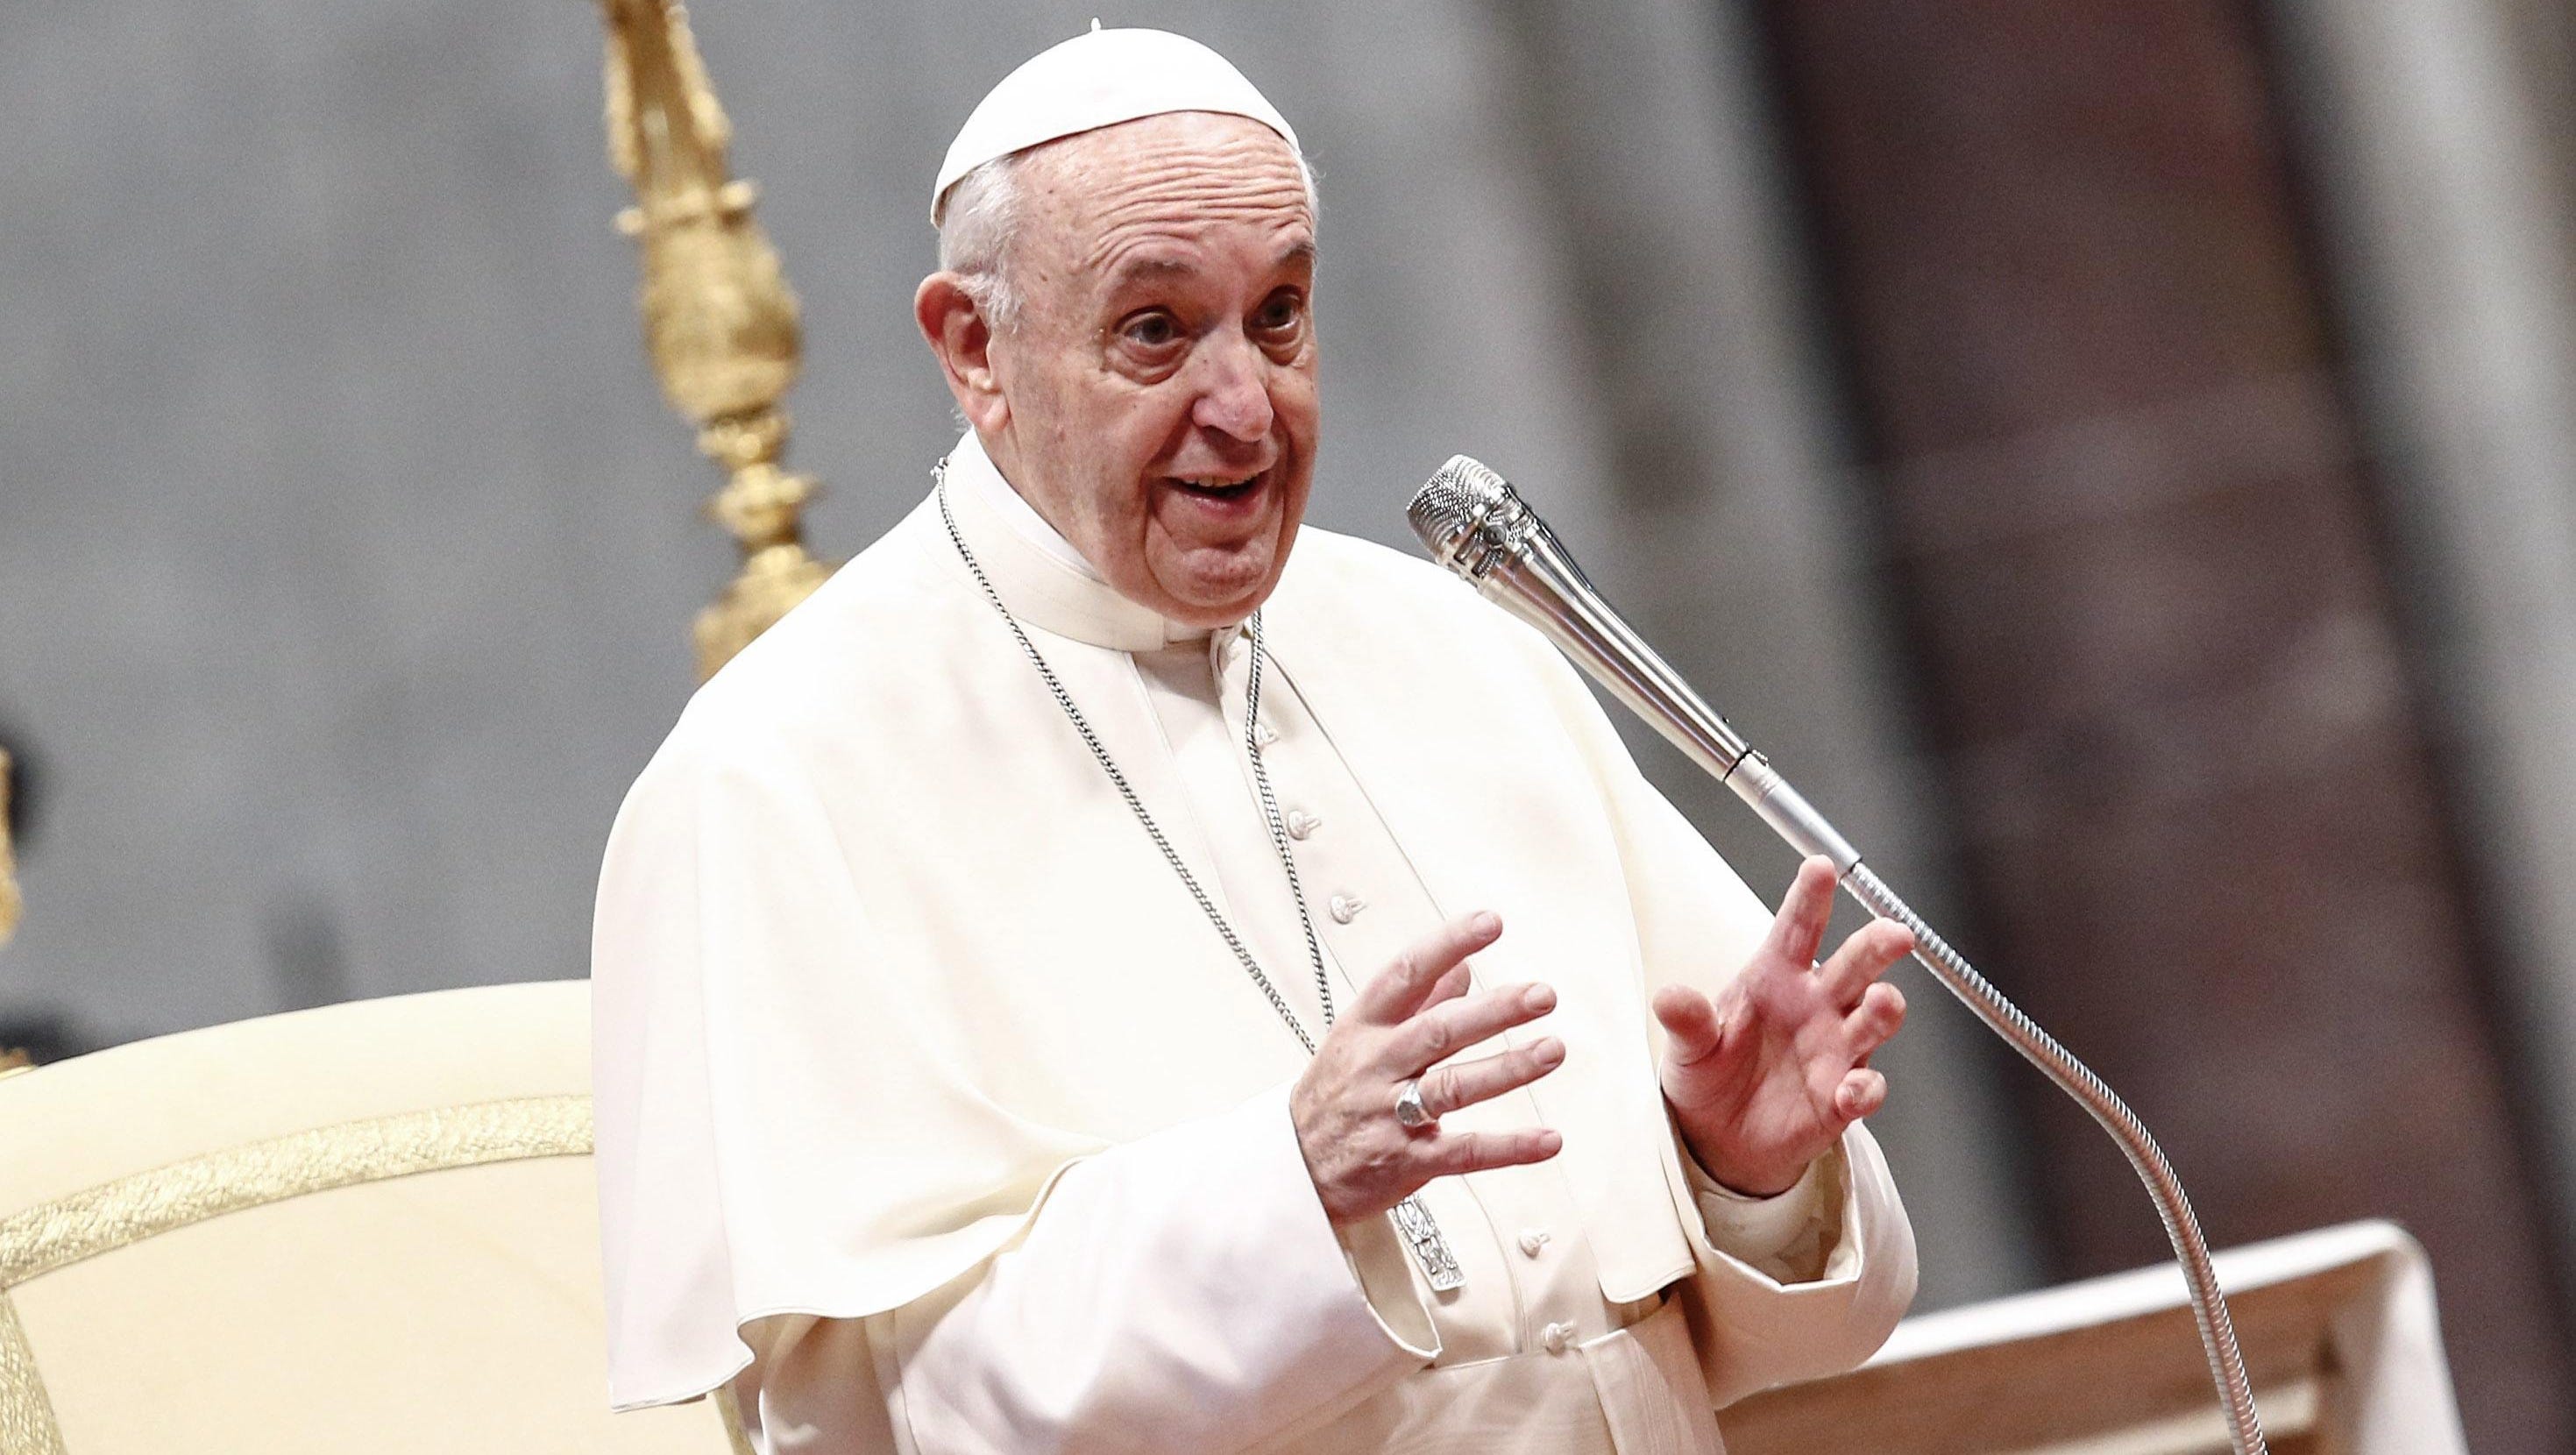 Pope Francis is popular, but waning conservatives, survey says